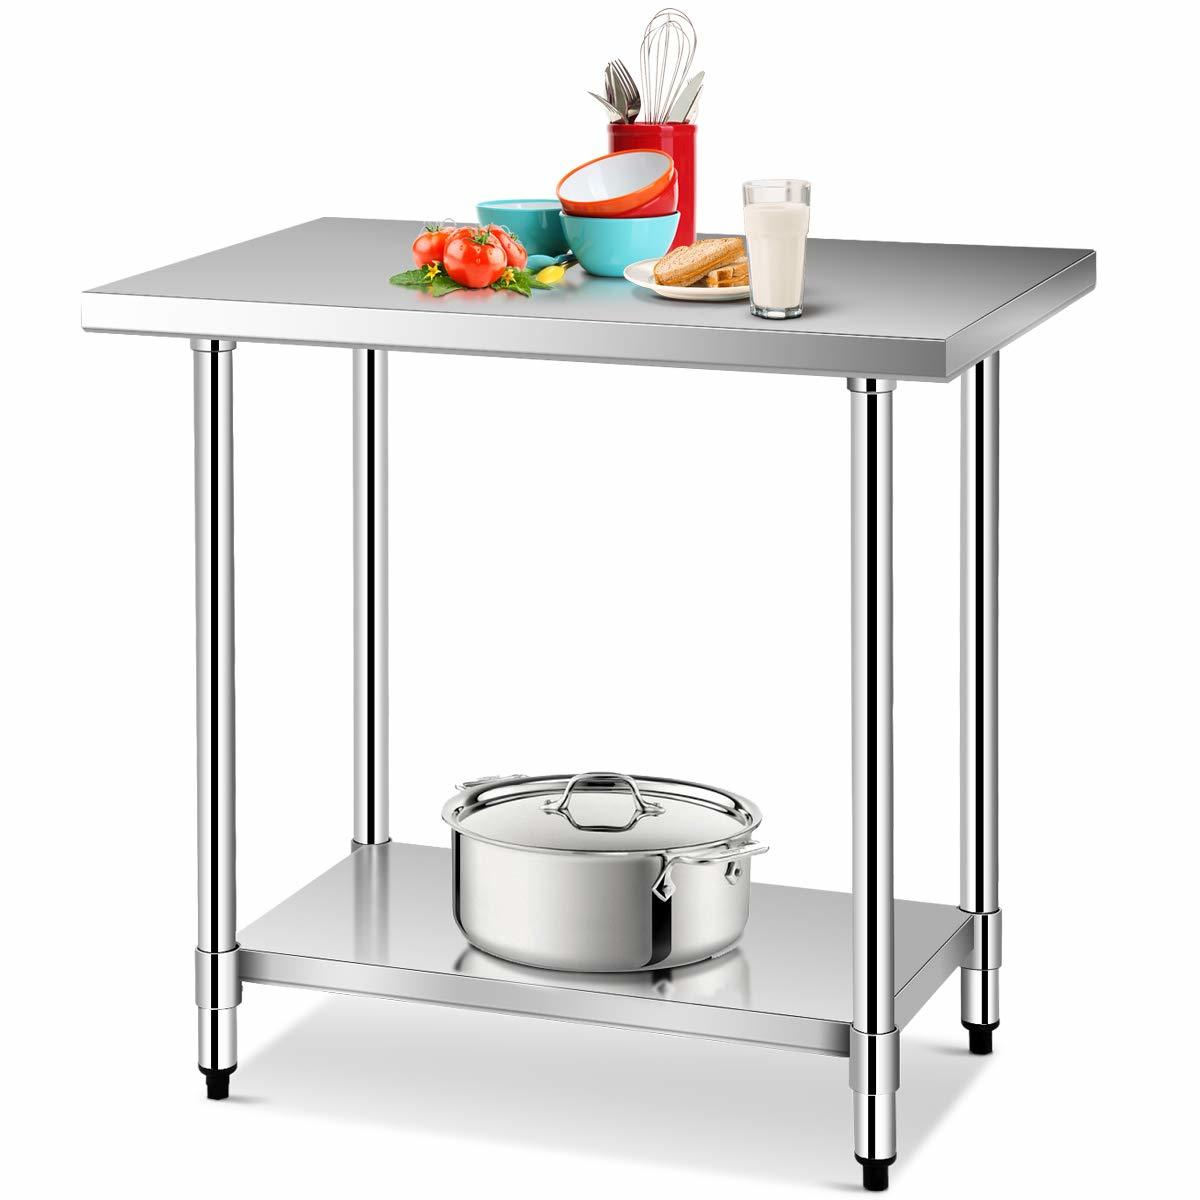 Stainless Steel Commercial Work Food Prep Table